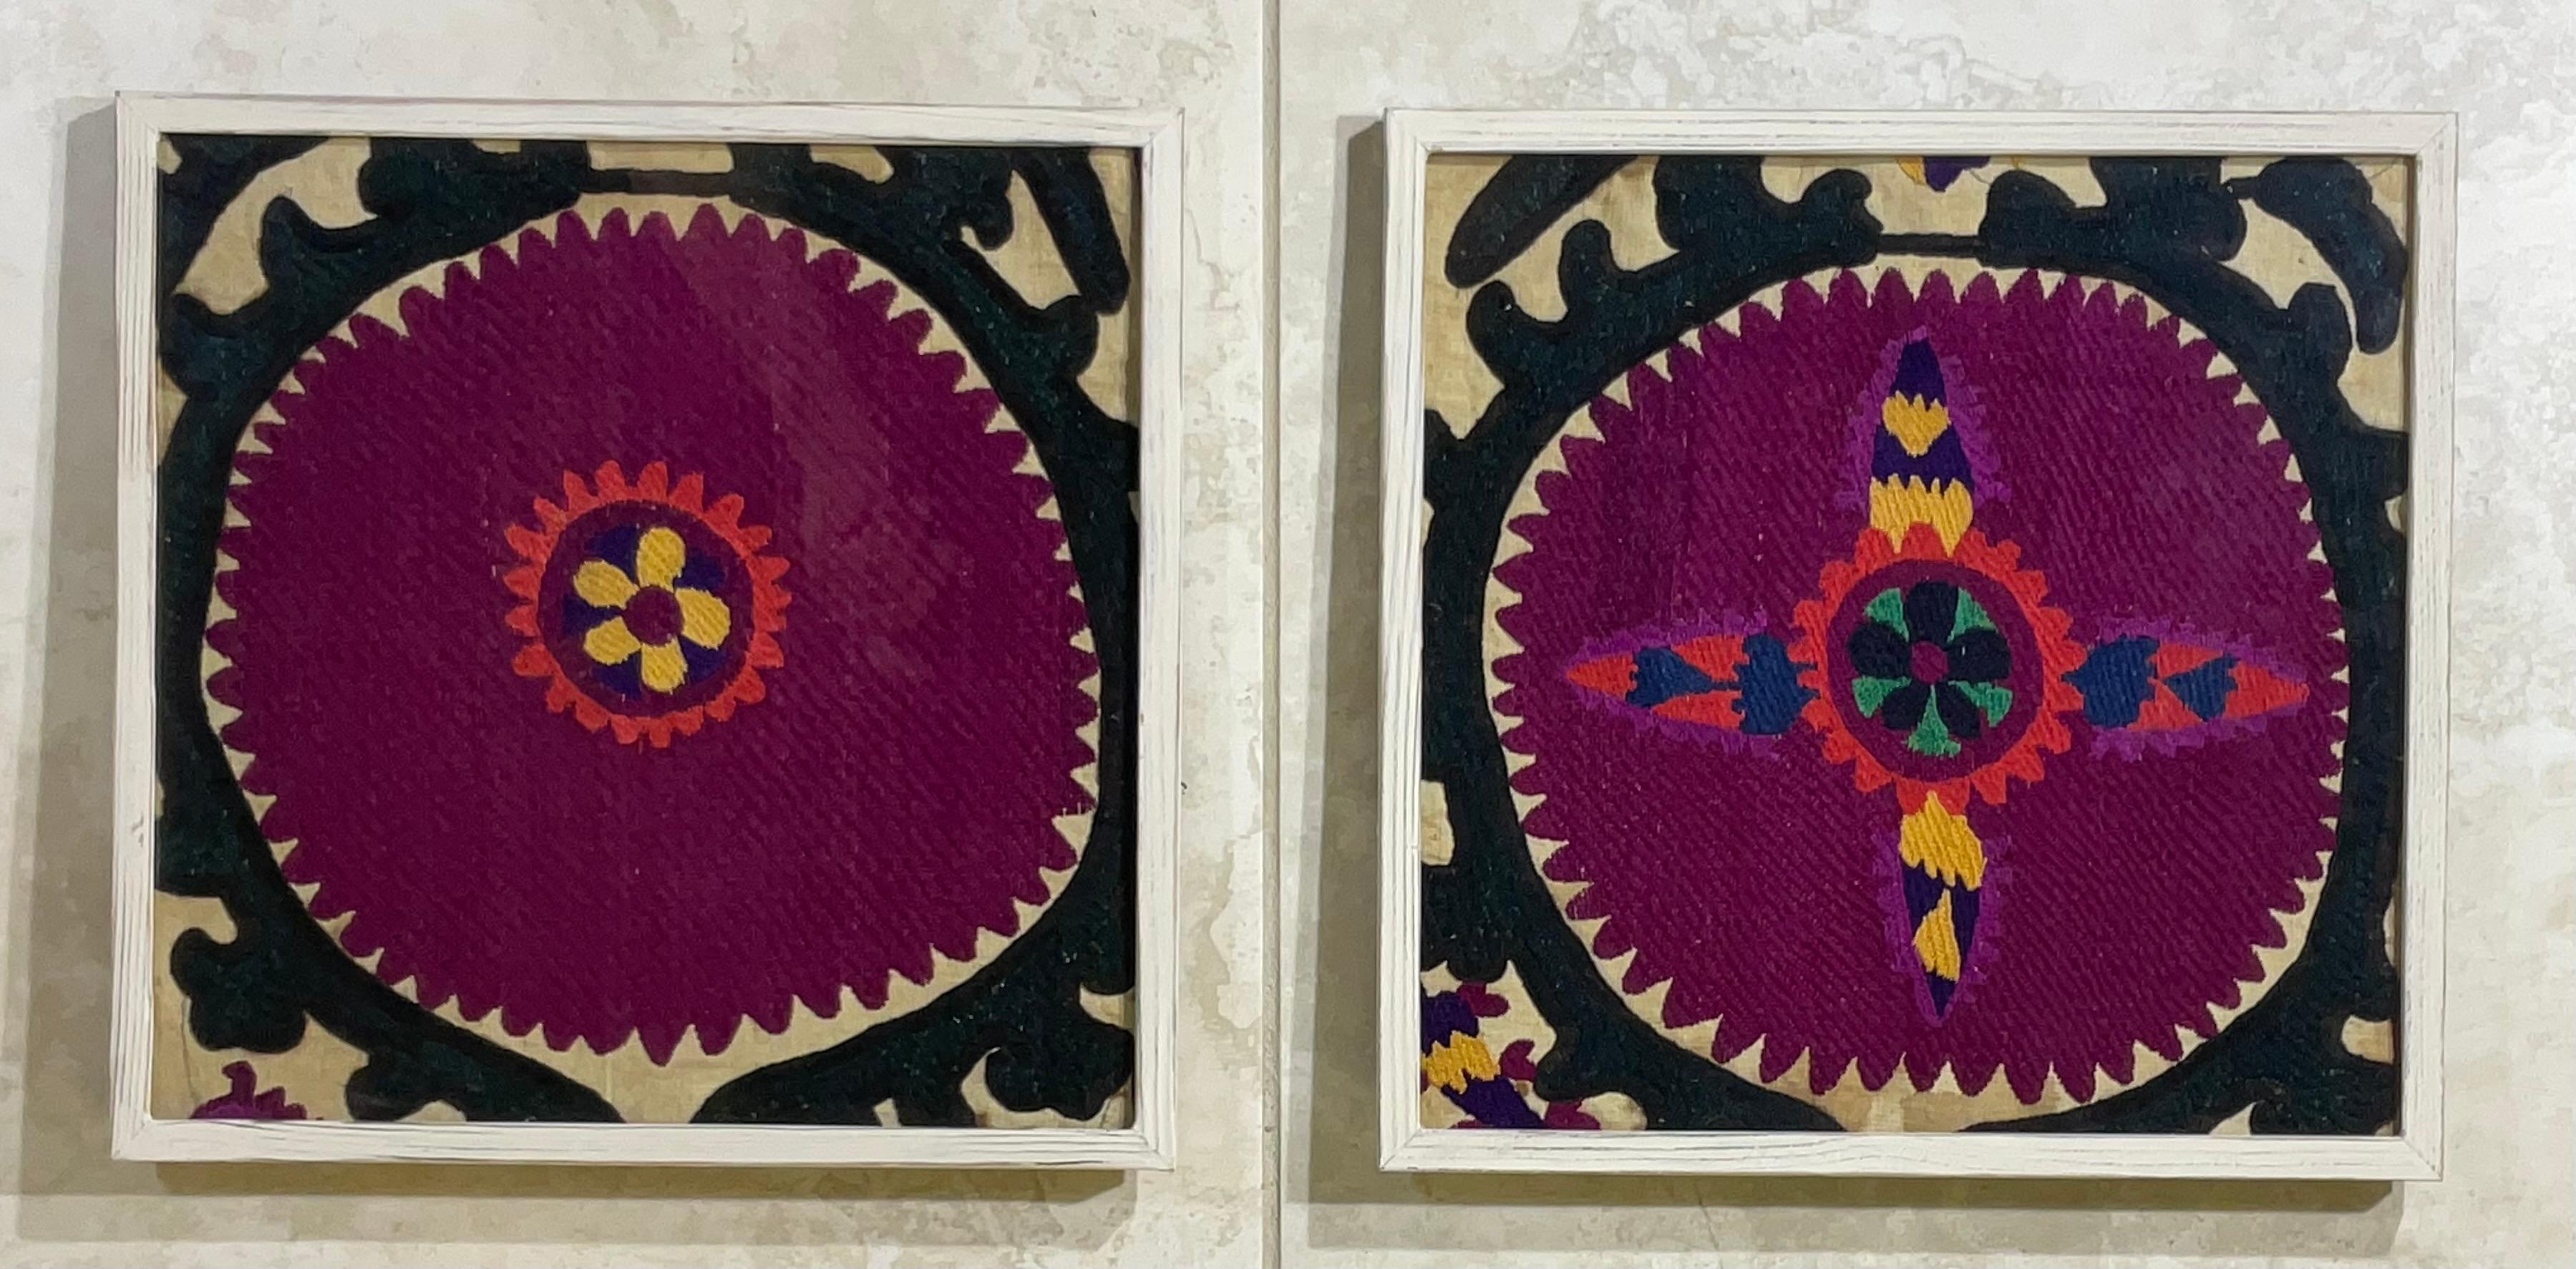 Exceptional antique hand embroidery Suzani textile, beautiful purple color , with circle of life round motif , professionally mounted on hand painted wood frame to make beautiful versatile objects of art for wall hanging.
